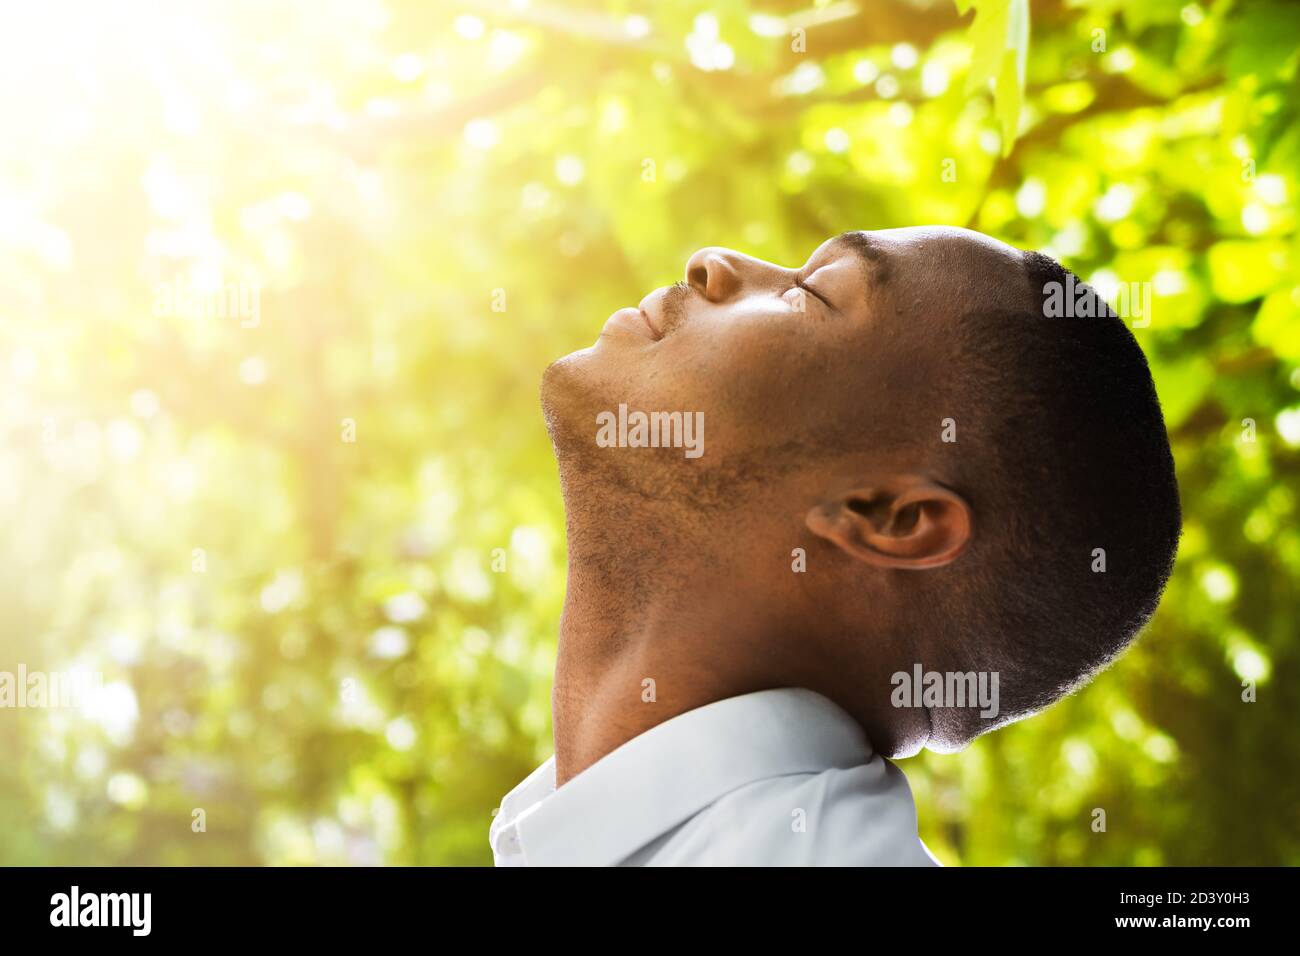 Breath Clean Air. Relax In Nature With Closed Eyes Stock Photo